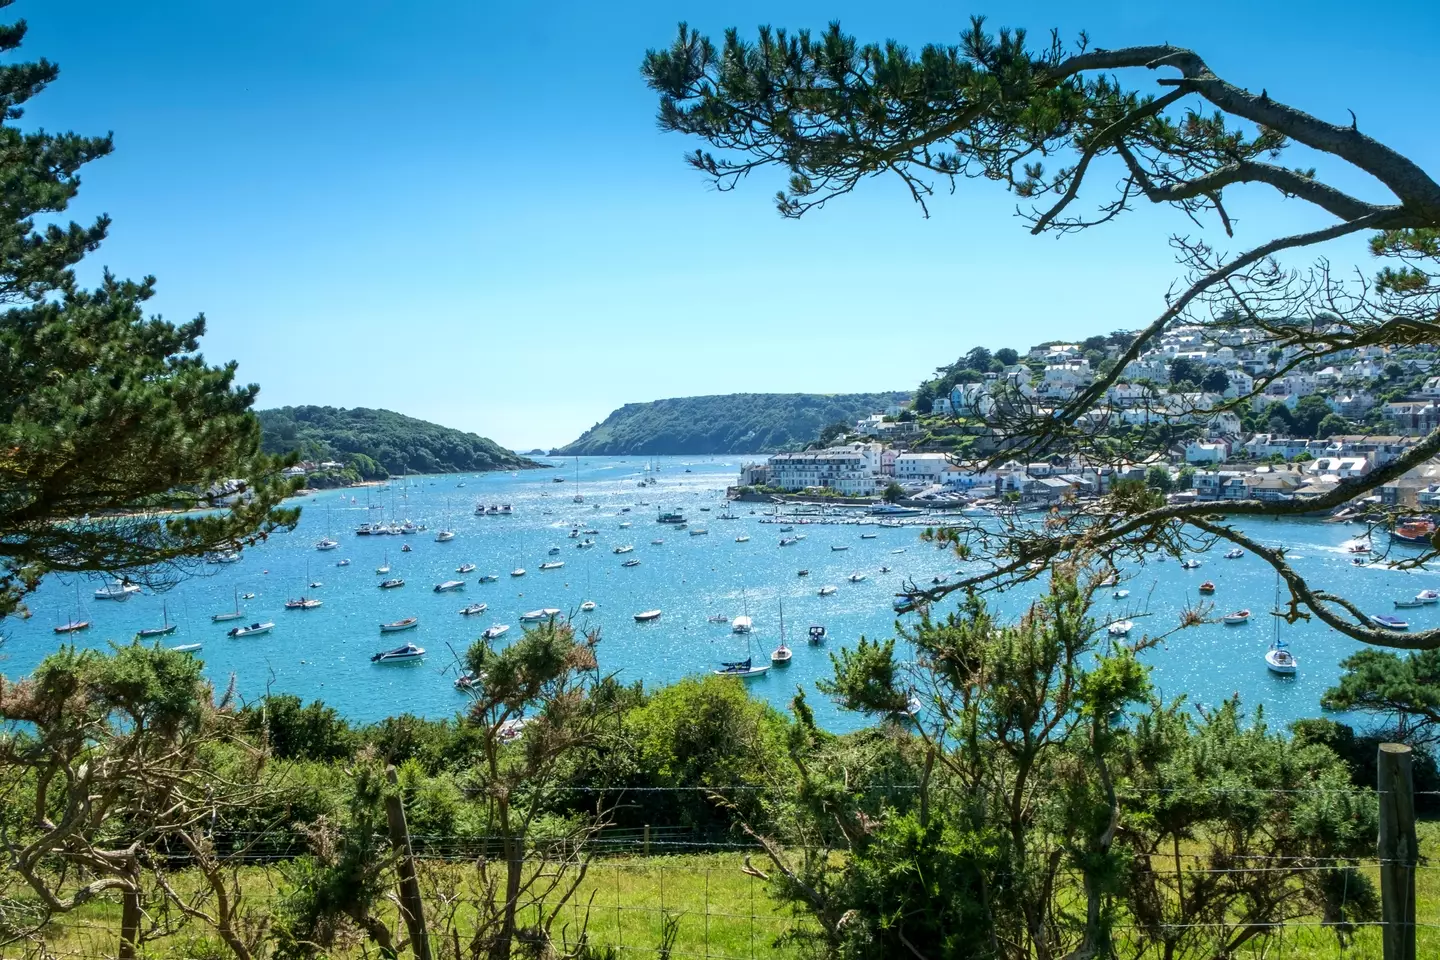 View of Kingsbridge Estuary and Salcombe from Snapes Point.